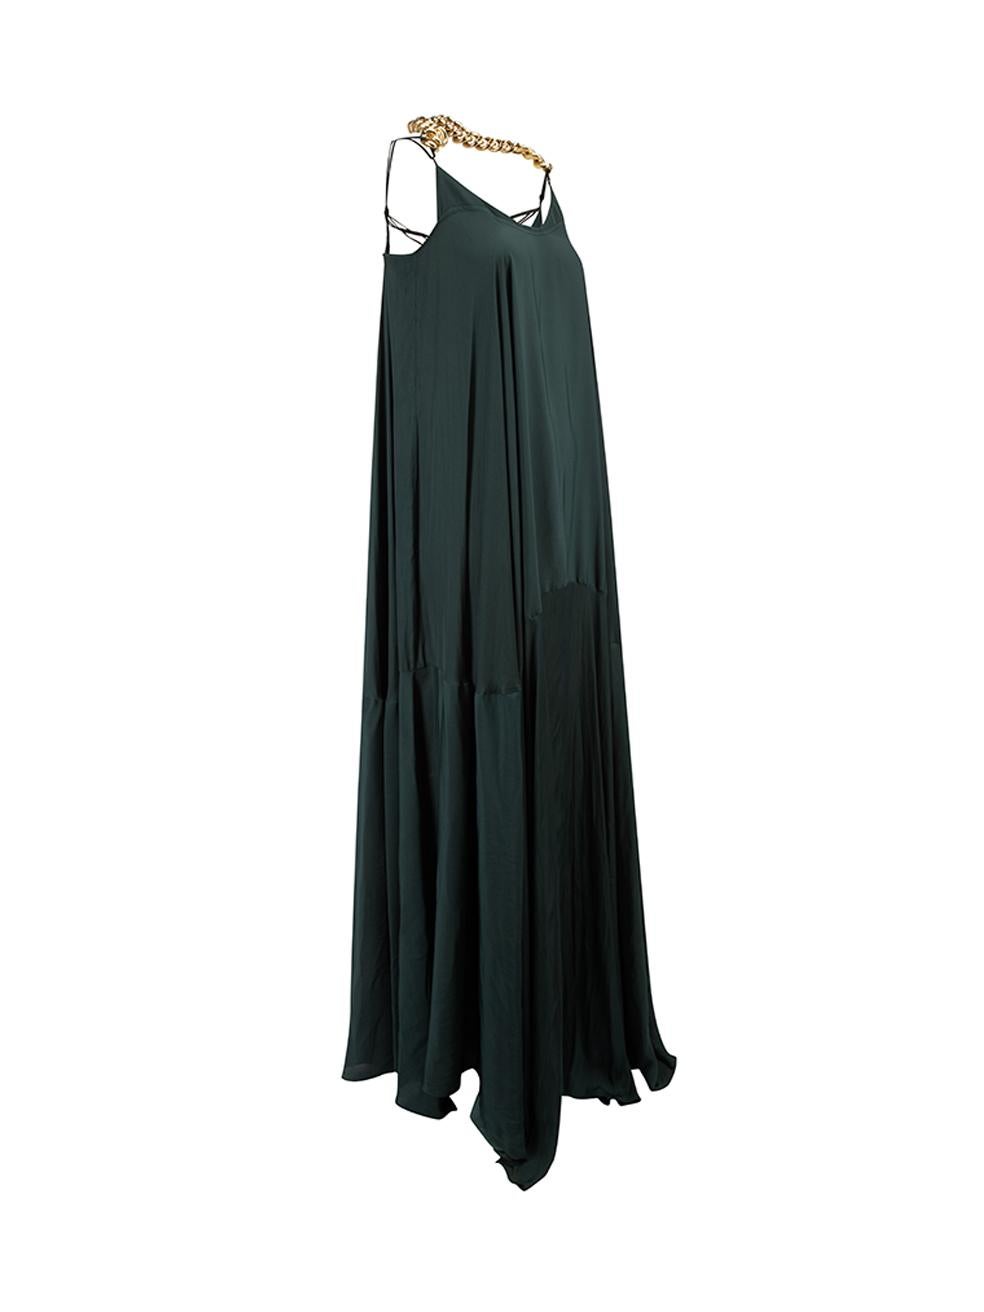 CONDITION is Very good. Minimal wear to dress is evident. Minimal wear and pulls to thread on the outer fabric. Some of the lace up fabric is loose and fraying on this used Amanda Wakeley designer resale item. 



Details


Green

Polyester

Maxi